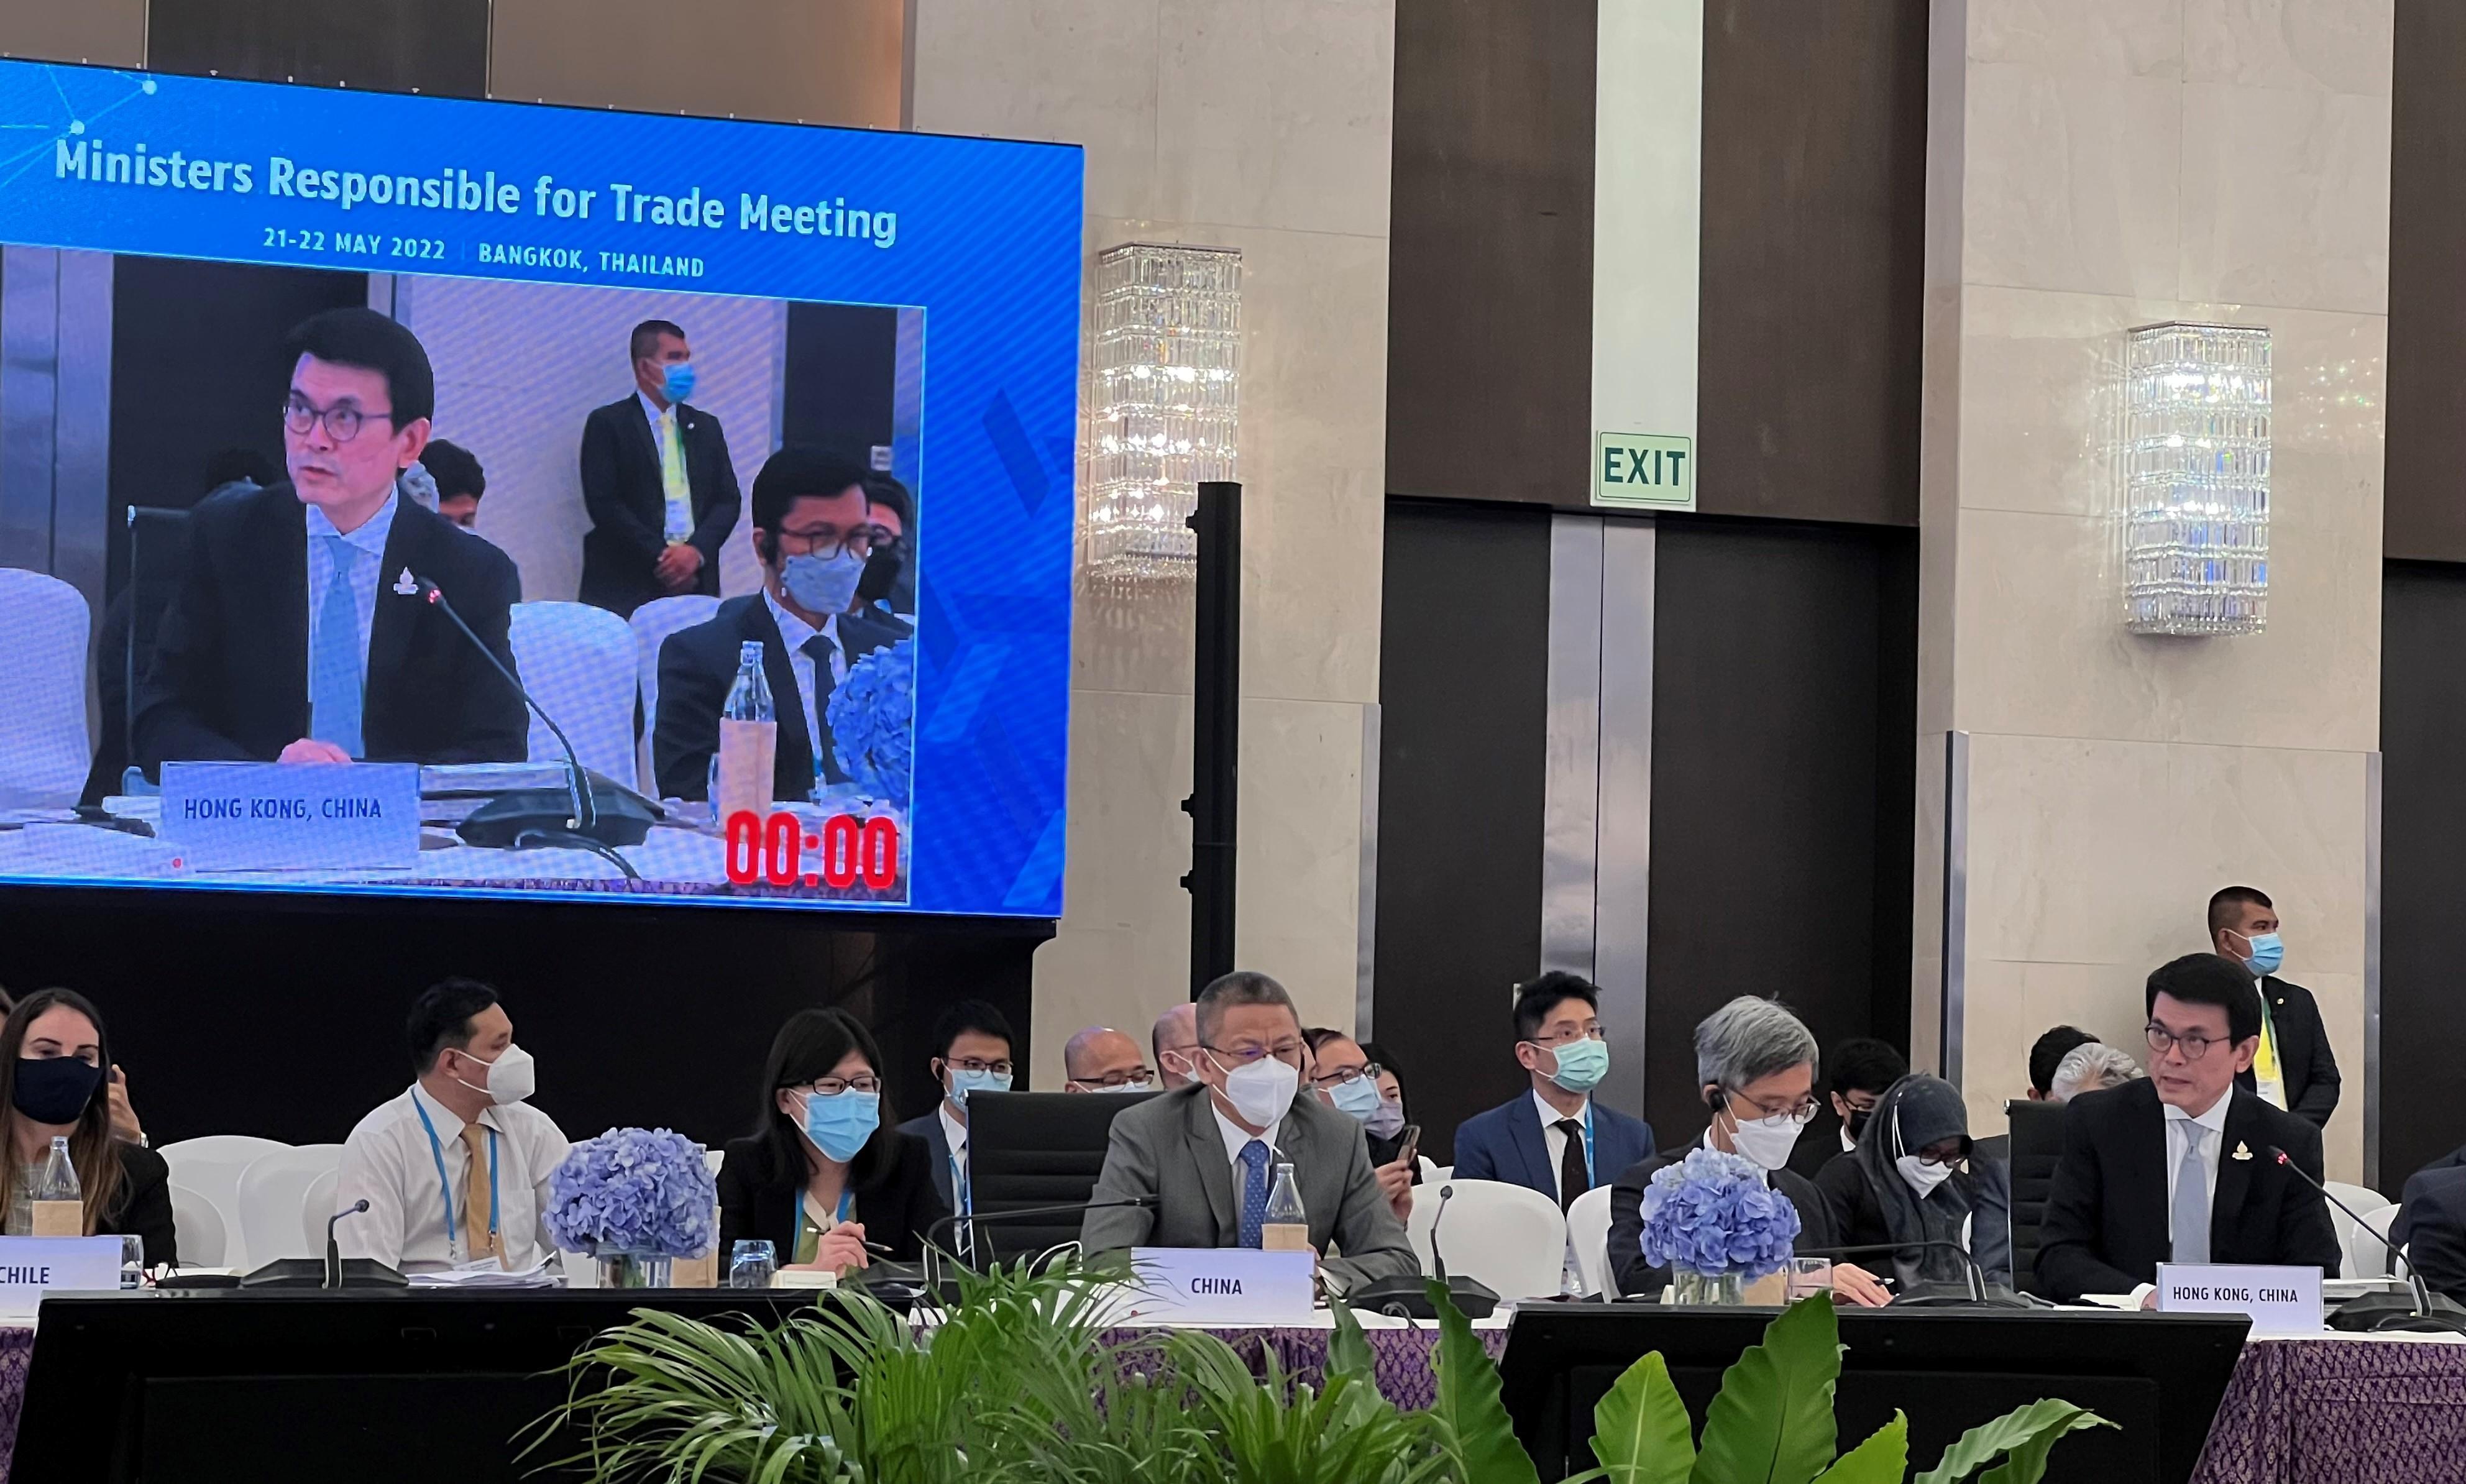 The Secretary for Commerce and Economic Development, Mr Edward Yau (first right), spoke at a discussion session entitled "Supporting the Multilateral Trading System" at the Asia-Pacific Economic Cooperation Ministers Responsible for Trade Meeting in Bangkok, Thailand, today (May 21).